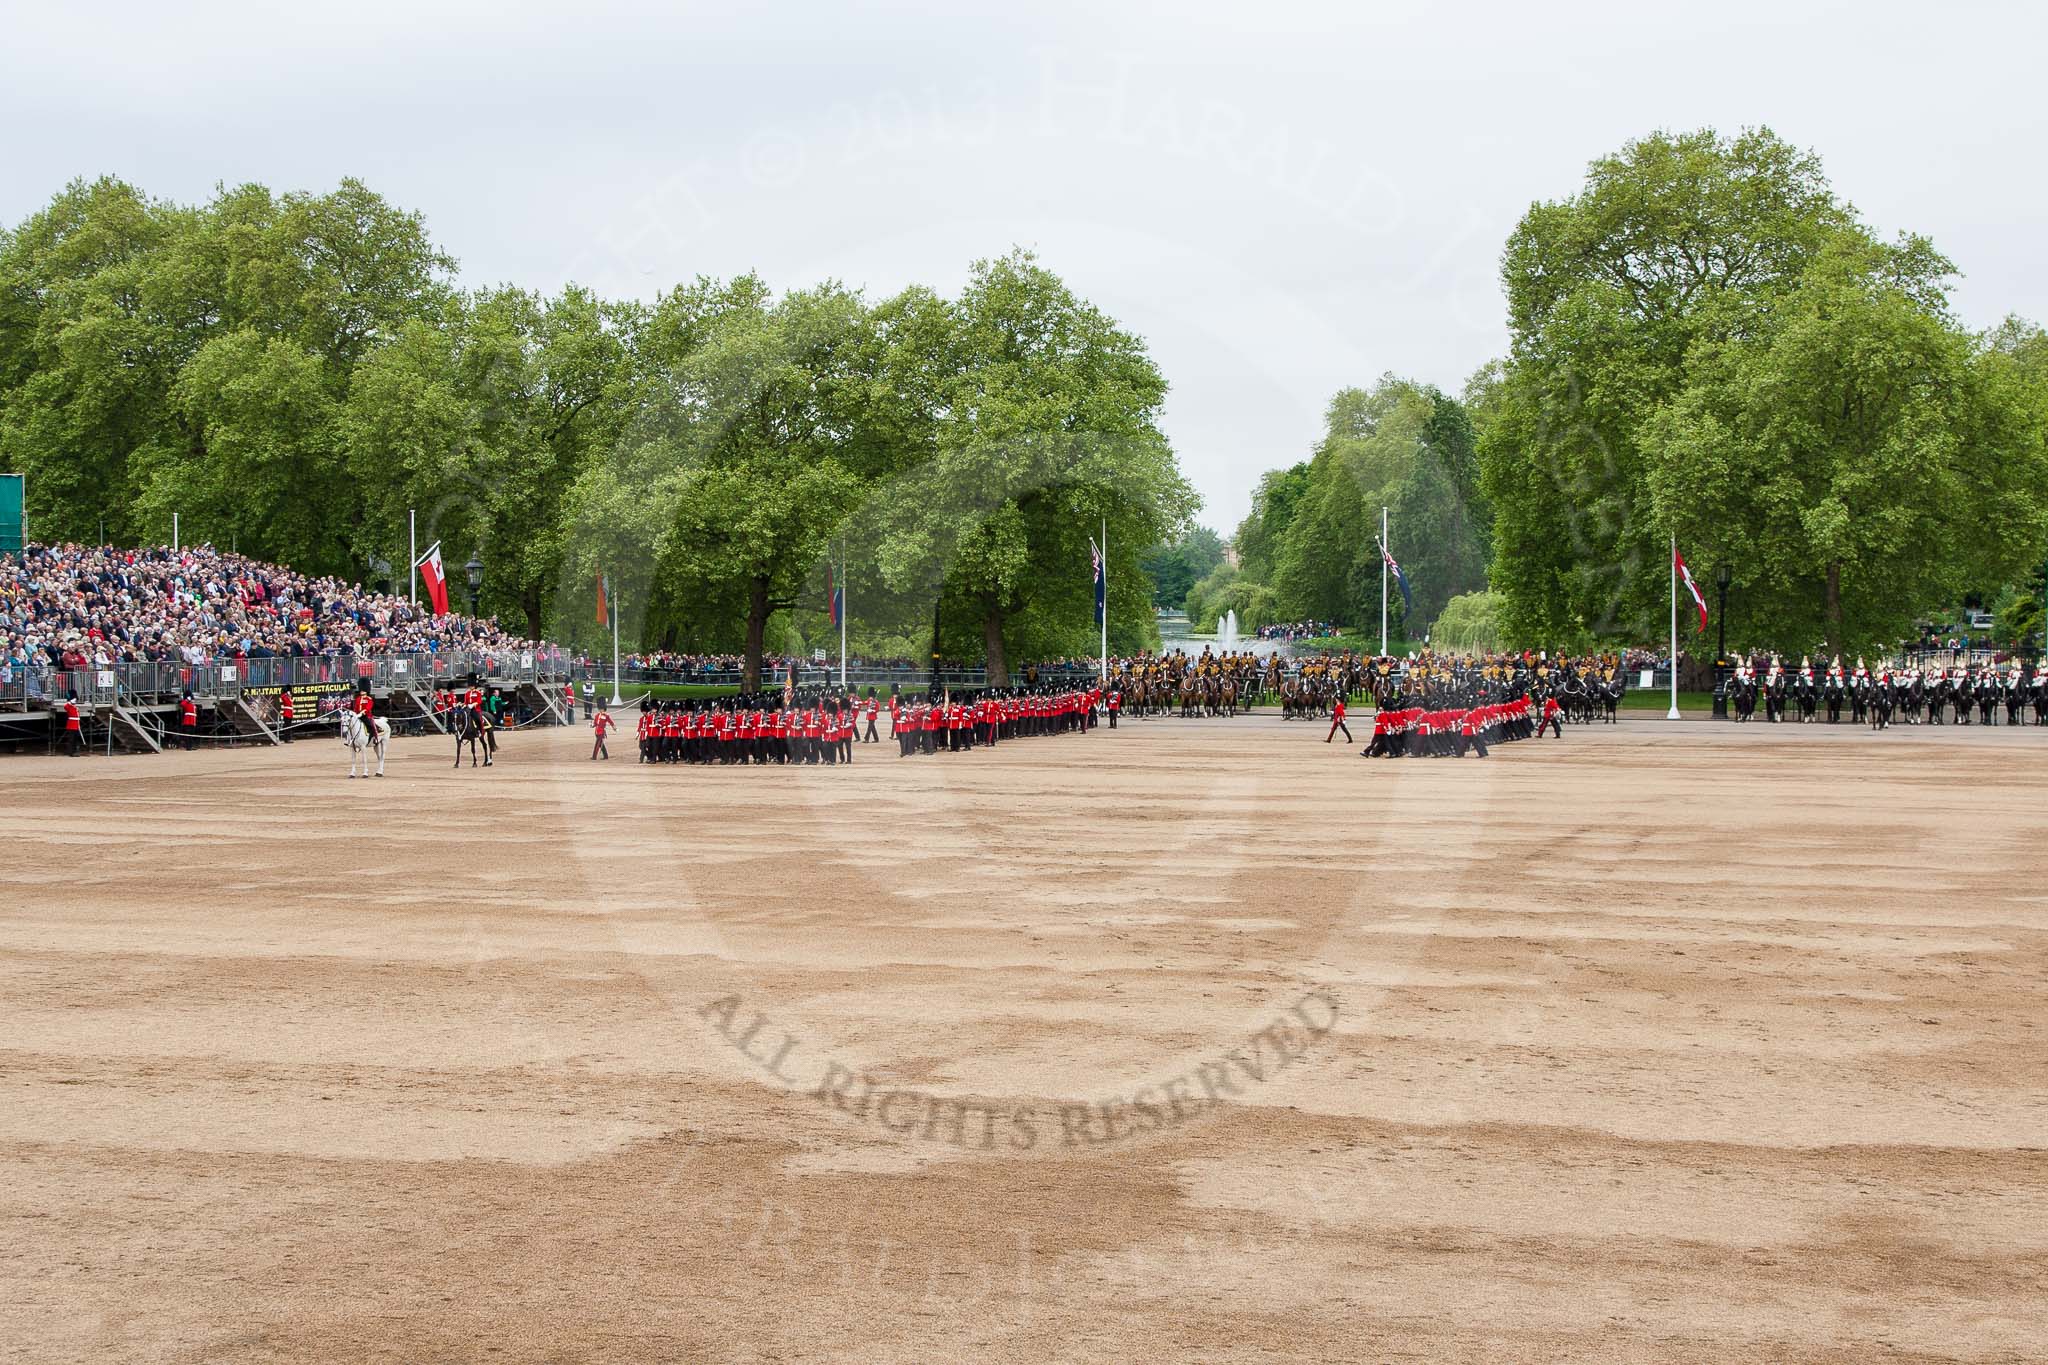 Major General's Review 2013: The March Past in Quick Time - the guards perform another ninety-degree-turn..
Horse Guards Parade, Westminster,
London SW1,

United Kingdom,
on 01 June 2013 at 11:40, image #530